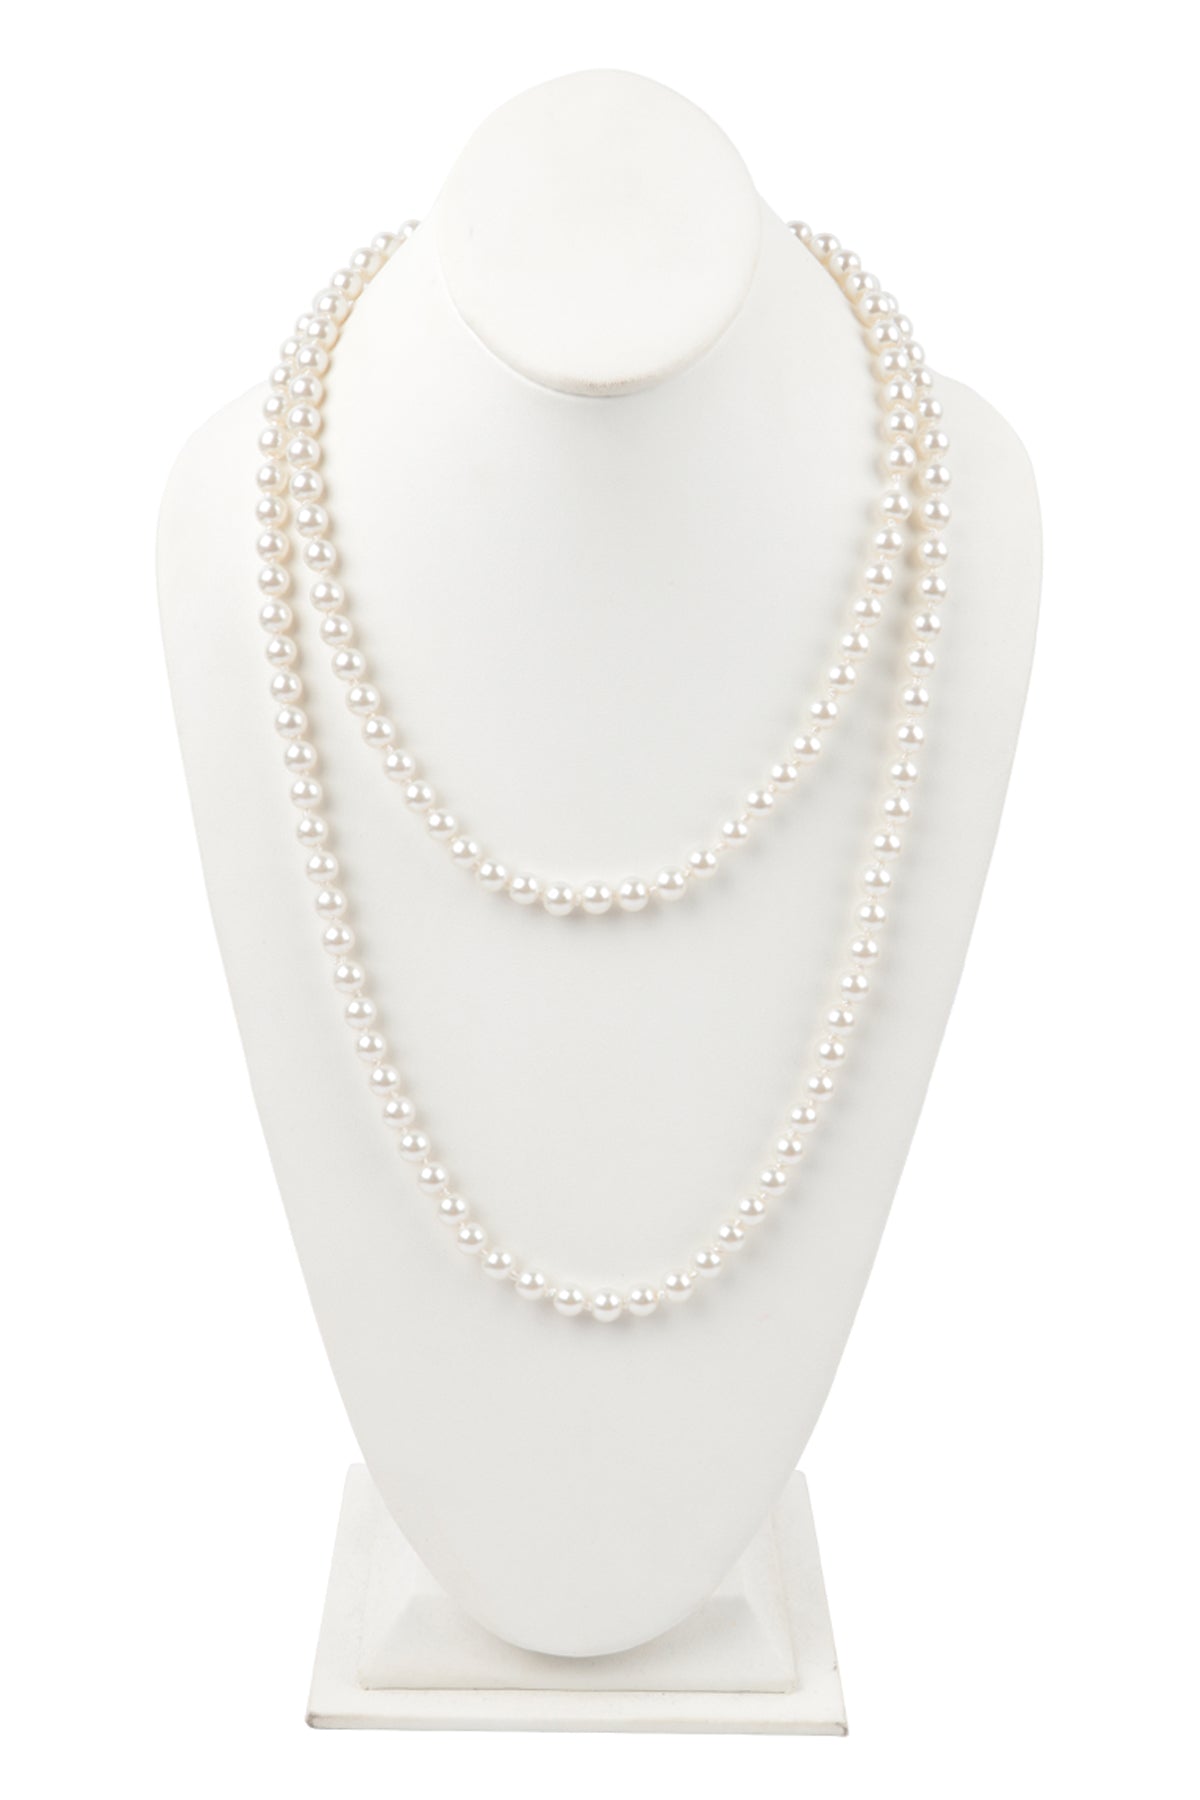 2 LINE PEARL BEADS NECKLACE-CREAM